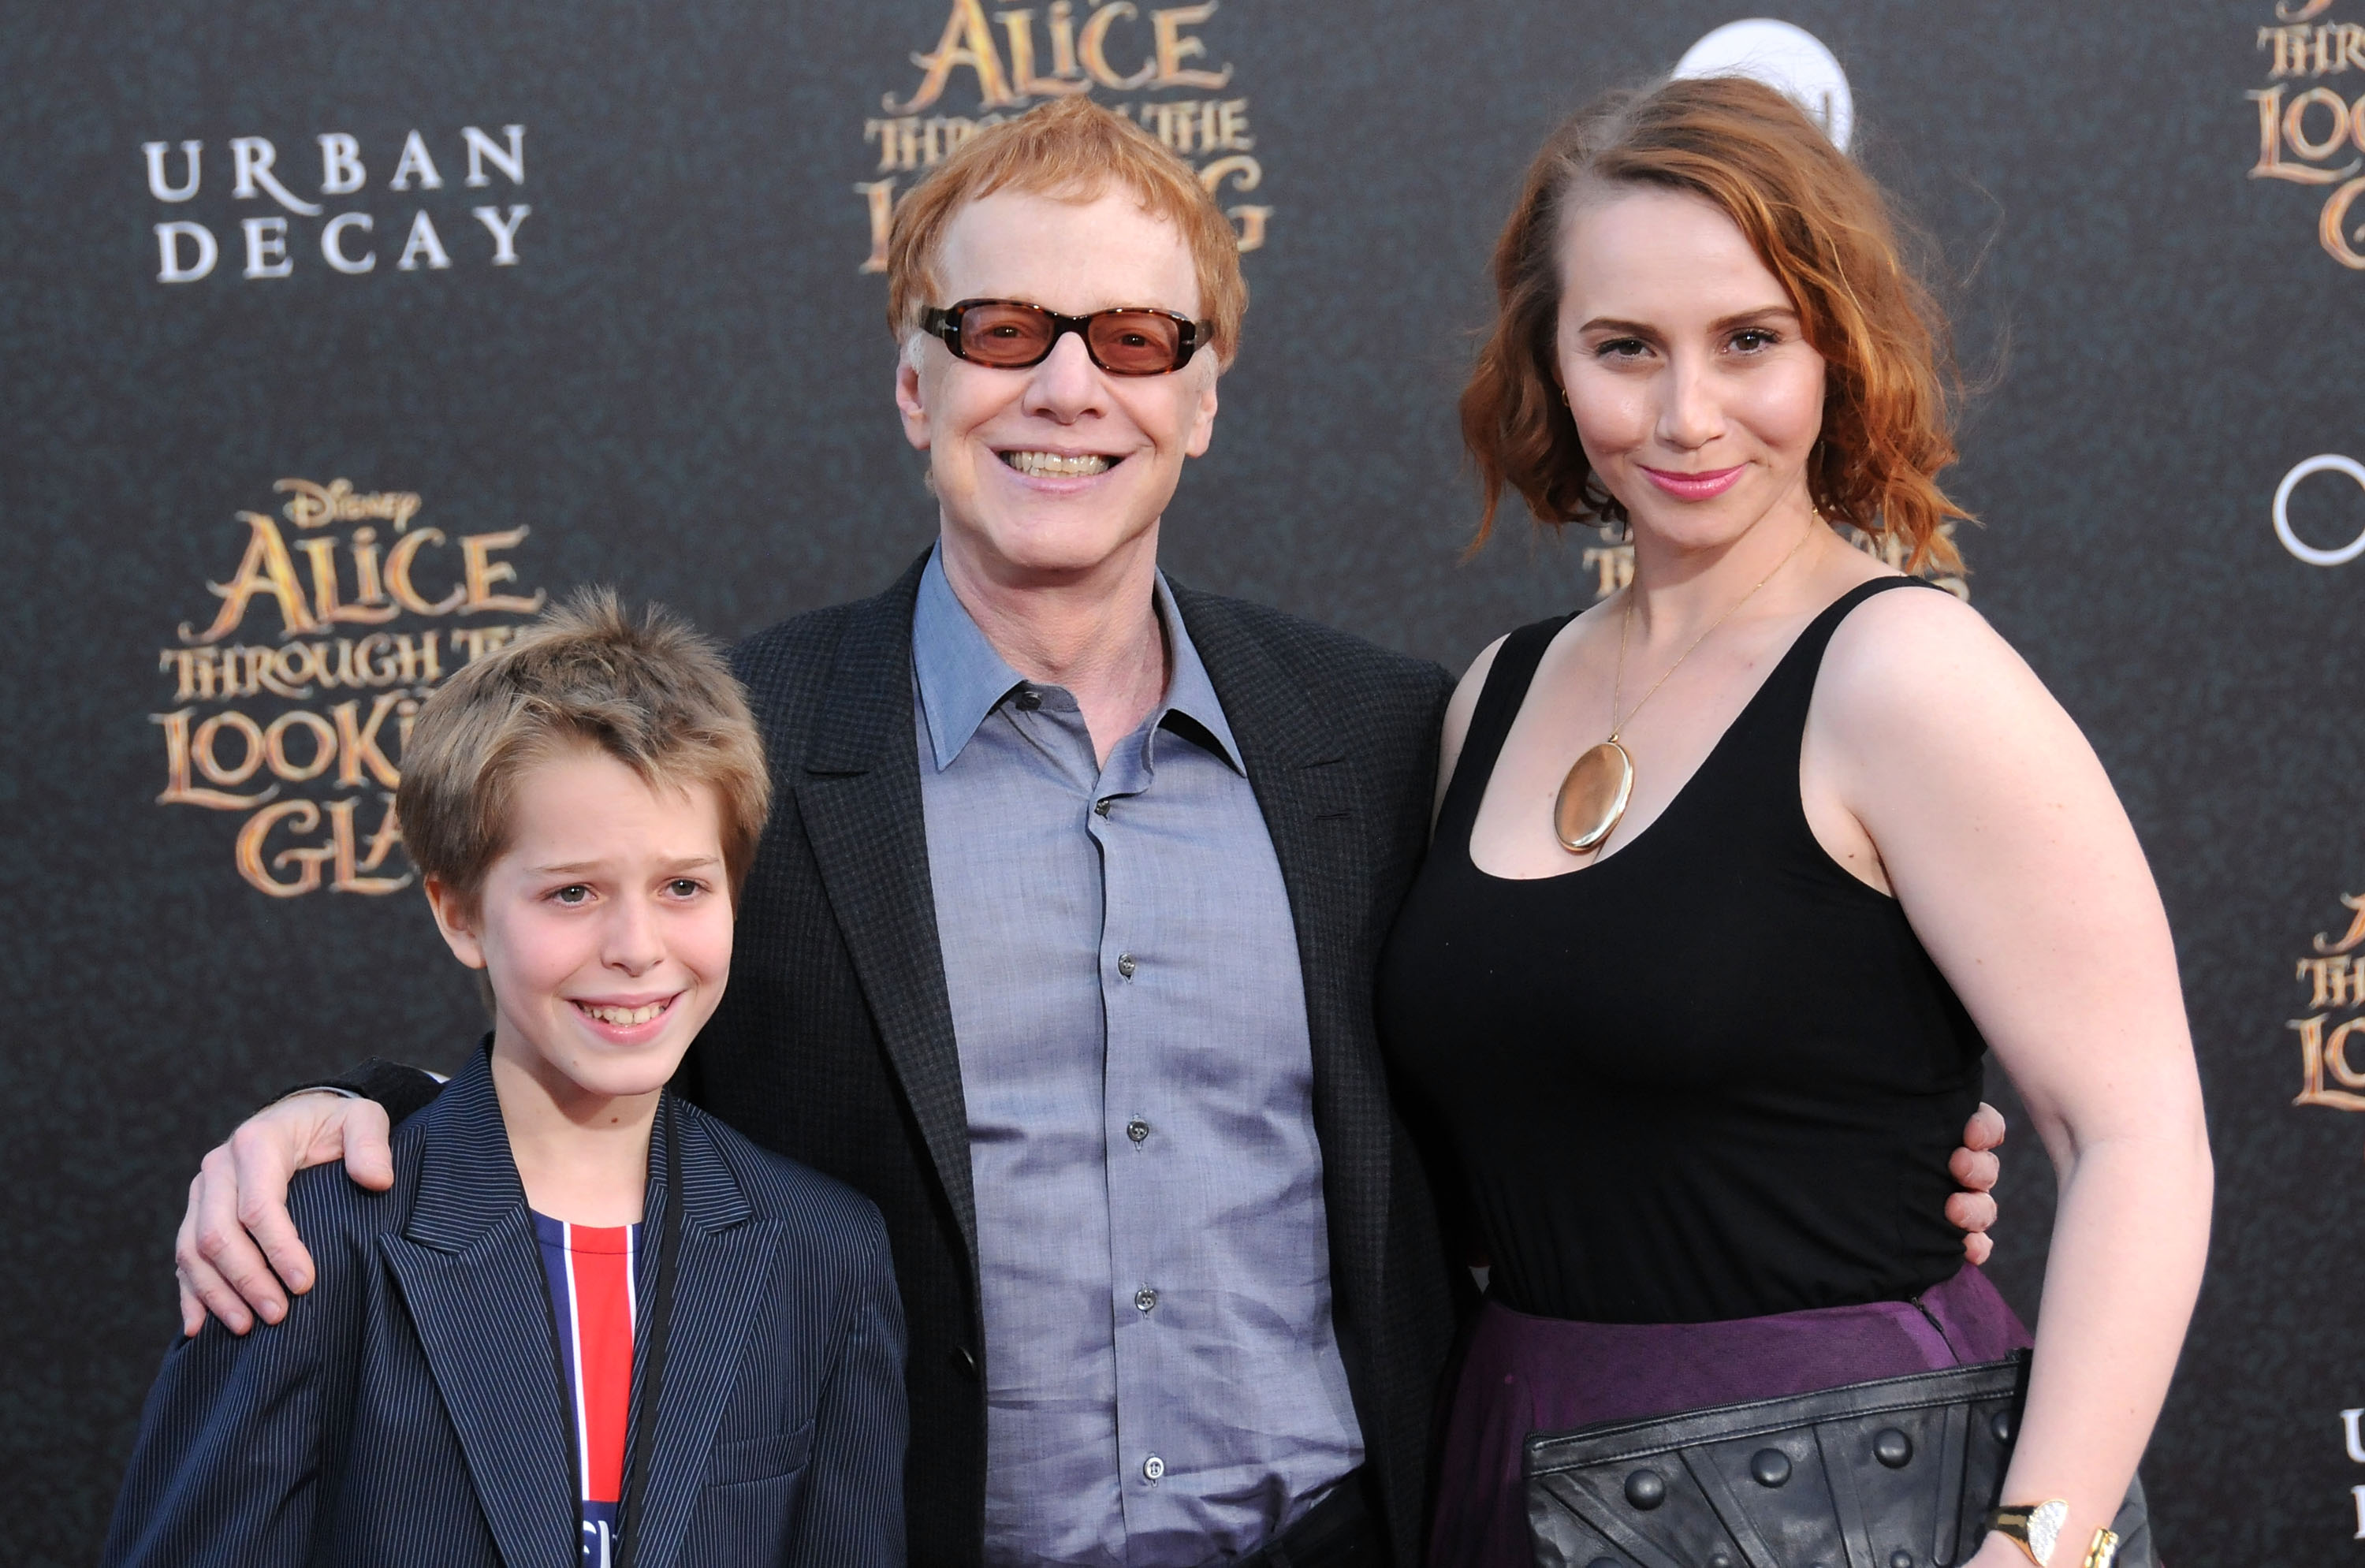 Oliver Elfman, Danny Elfman and Mali Elfman at the premiere of "Alice Through The Looking Glass'" on May 23, 2016 in Hollywood, California. | Source: Getty Images